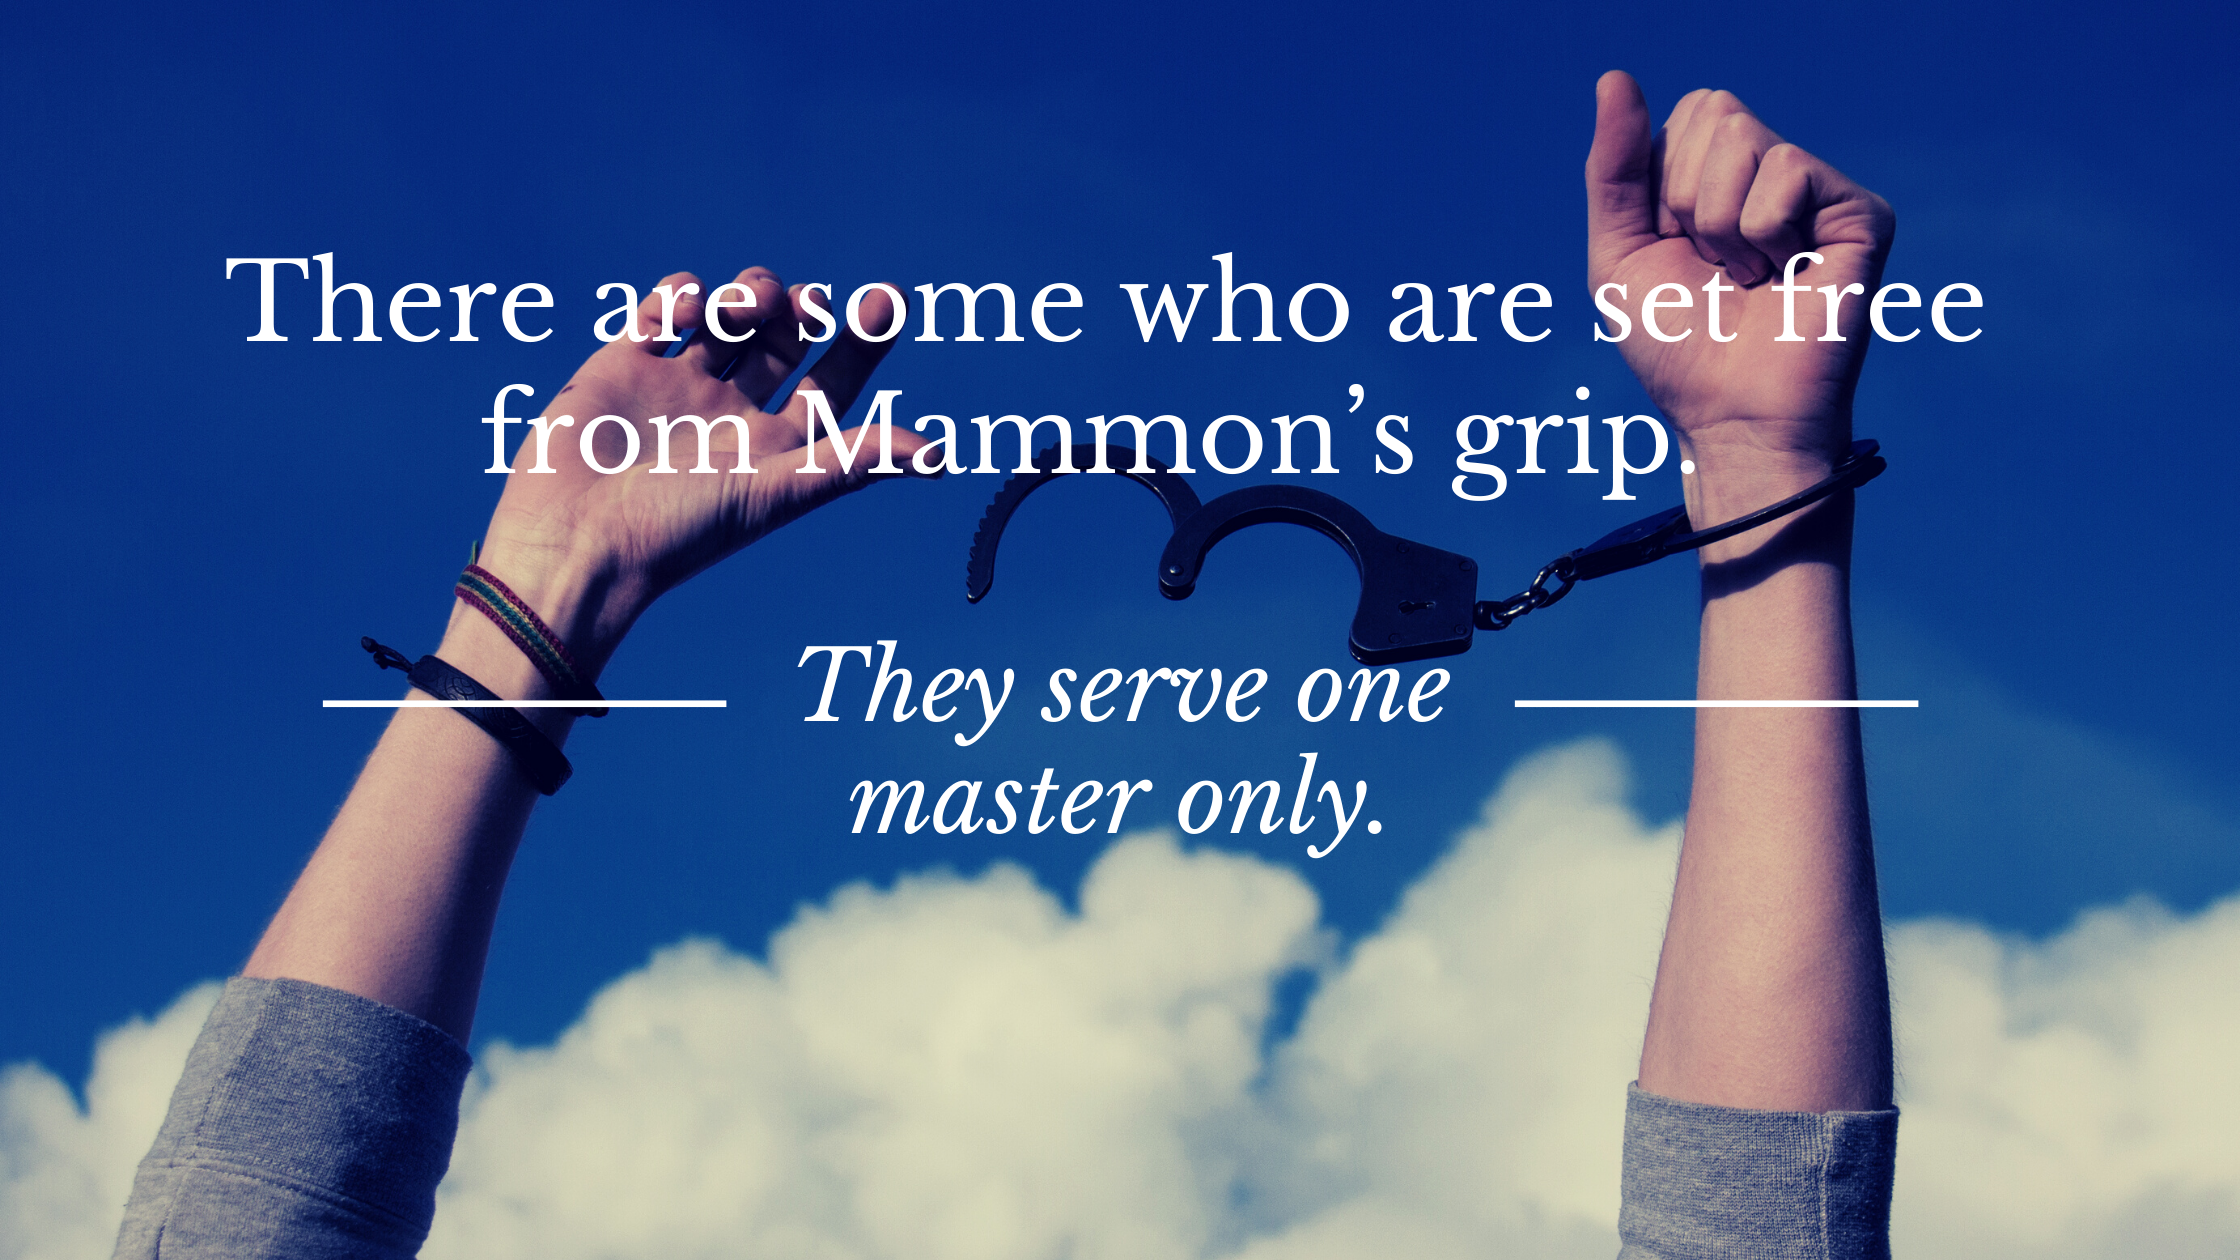 There are some who are set free from Mammon’s grip.